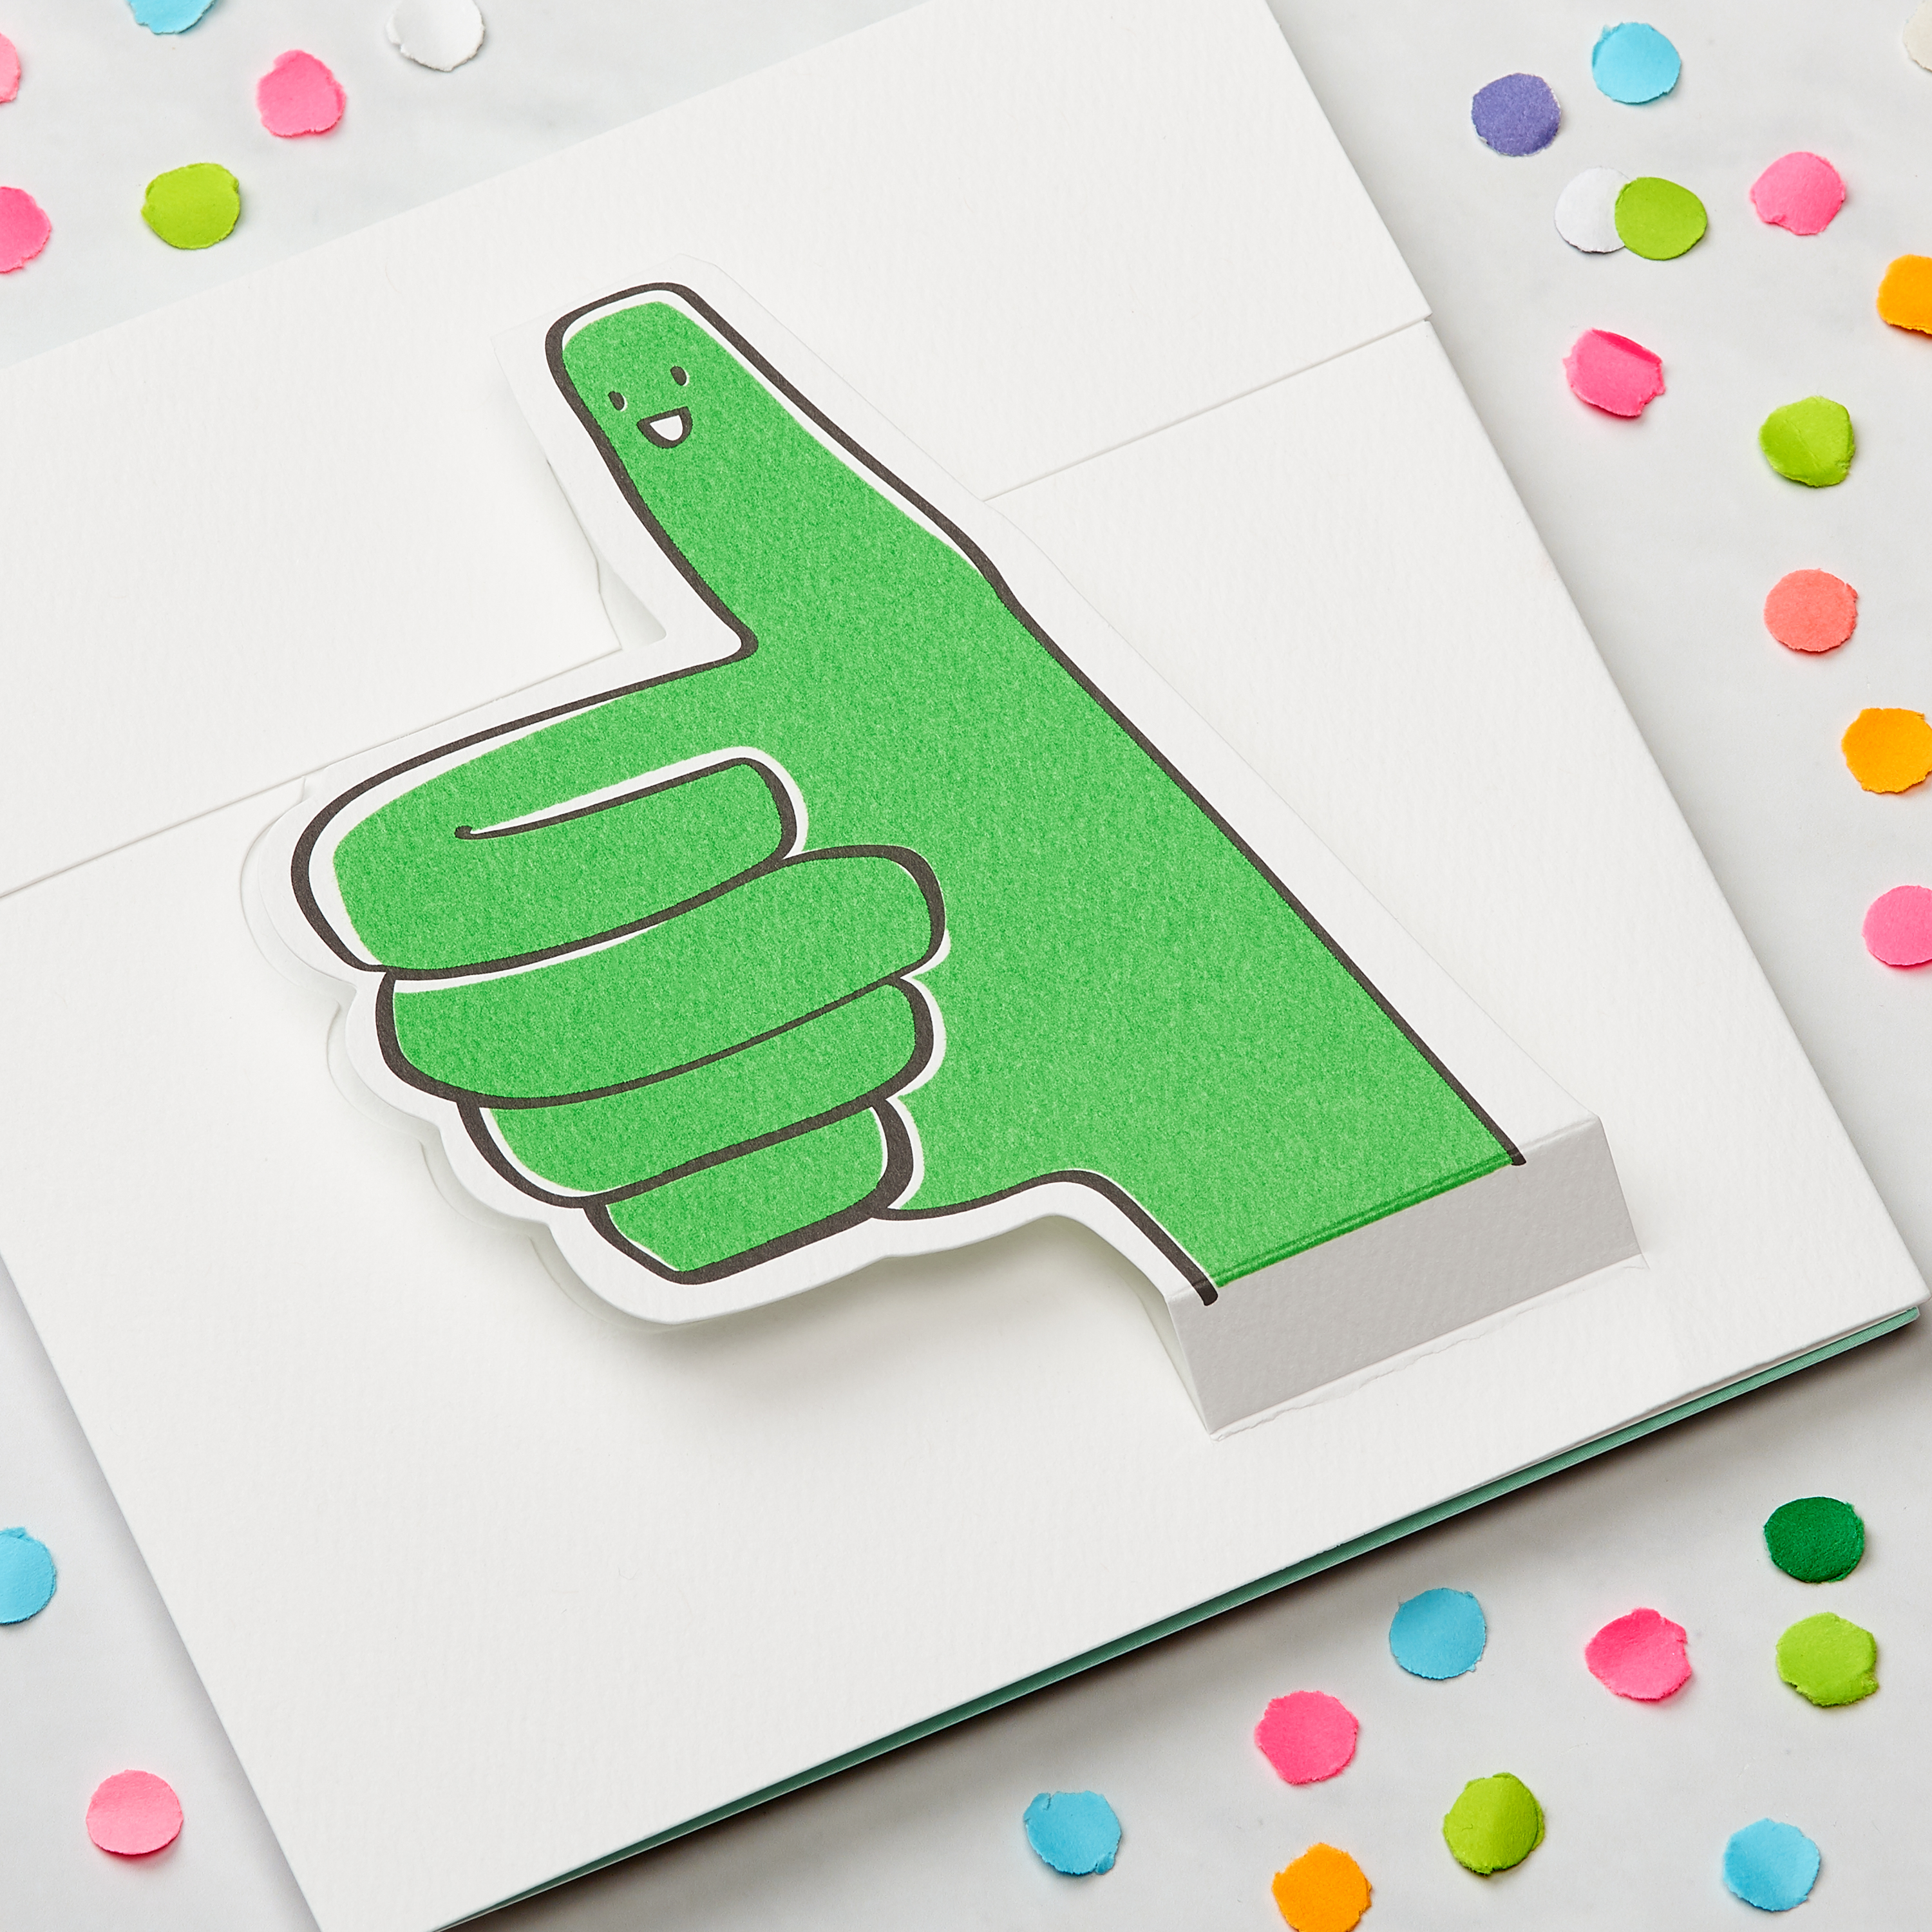 Thumbs Up Blank Greeting Card - Friendship, Thinking of You, Congratulations image